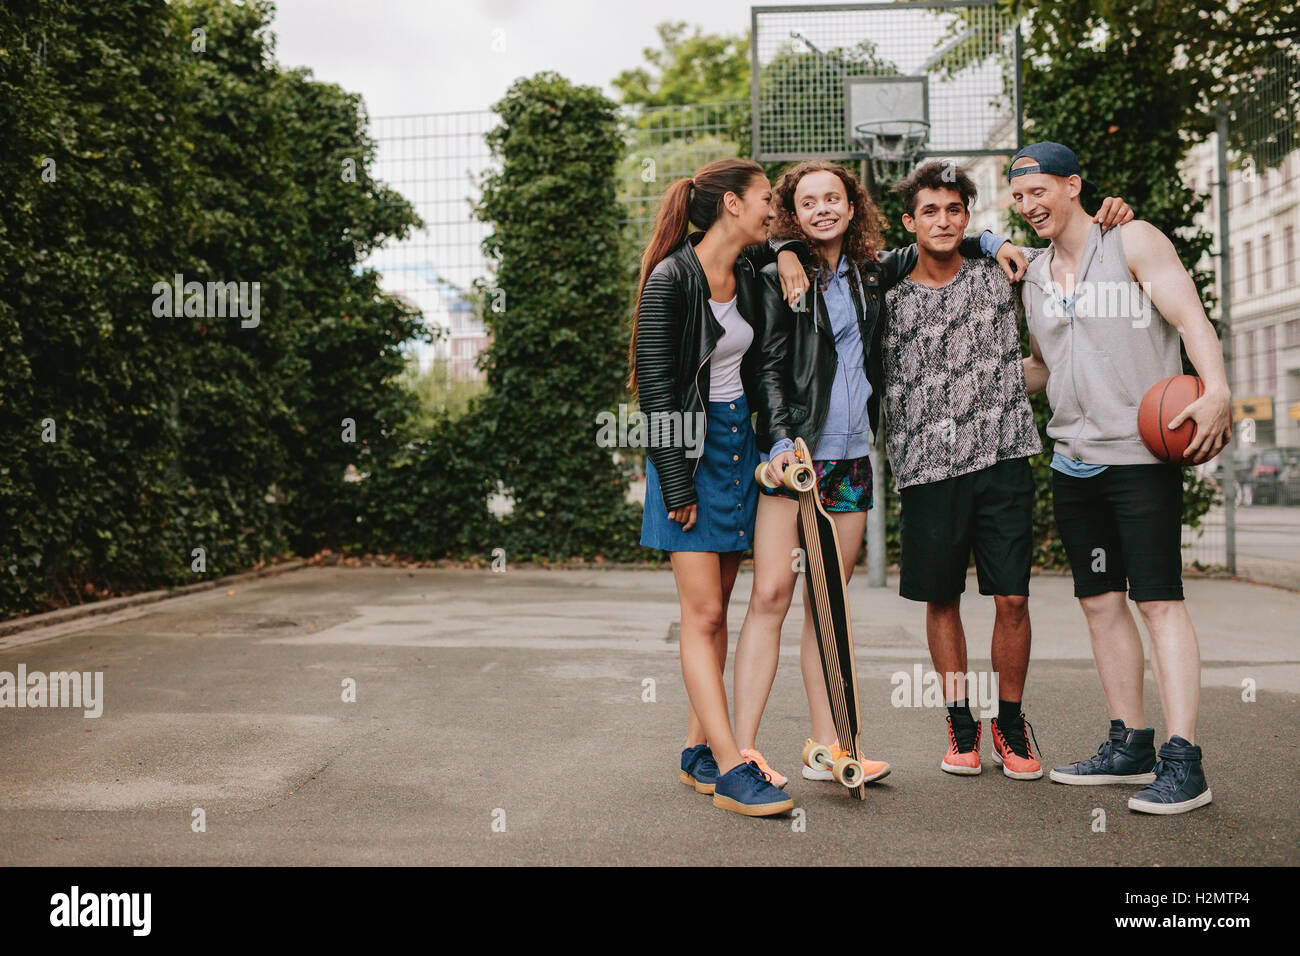 Full length portrait of teenage friends standing together with skateboard and basketball. Mixed race group of people enjoying ou Stock Photo